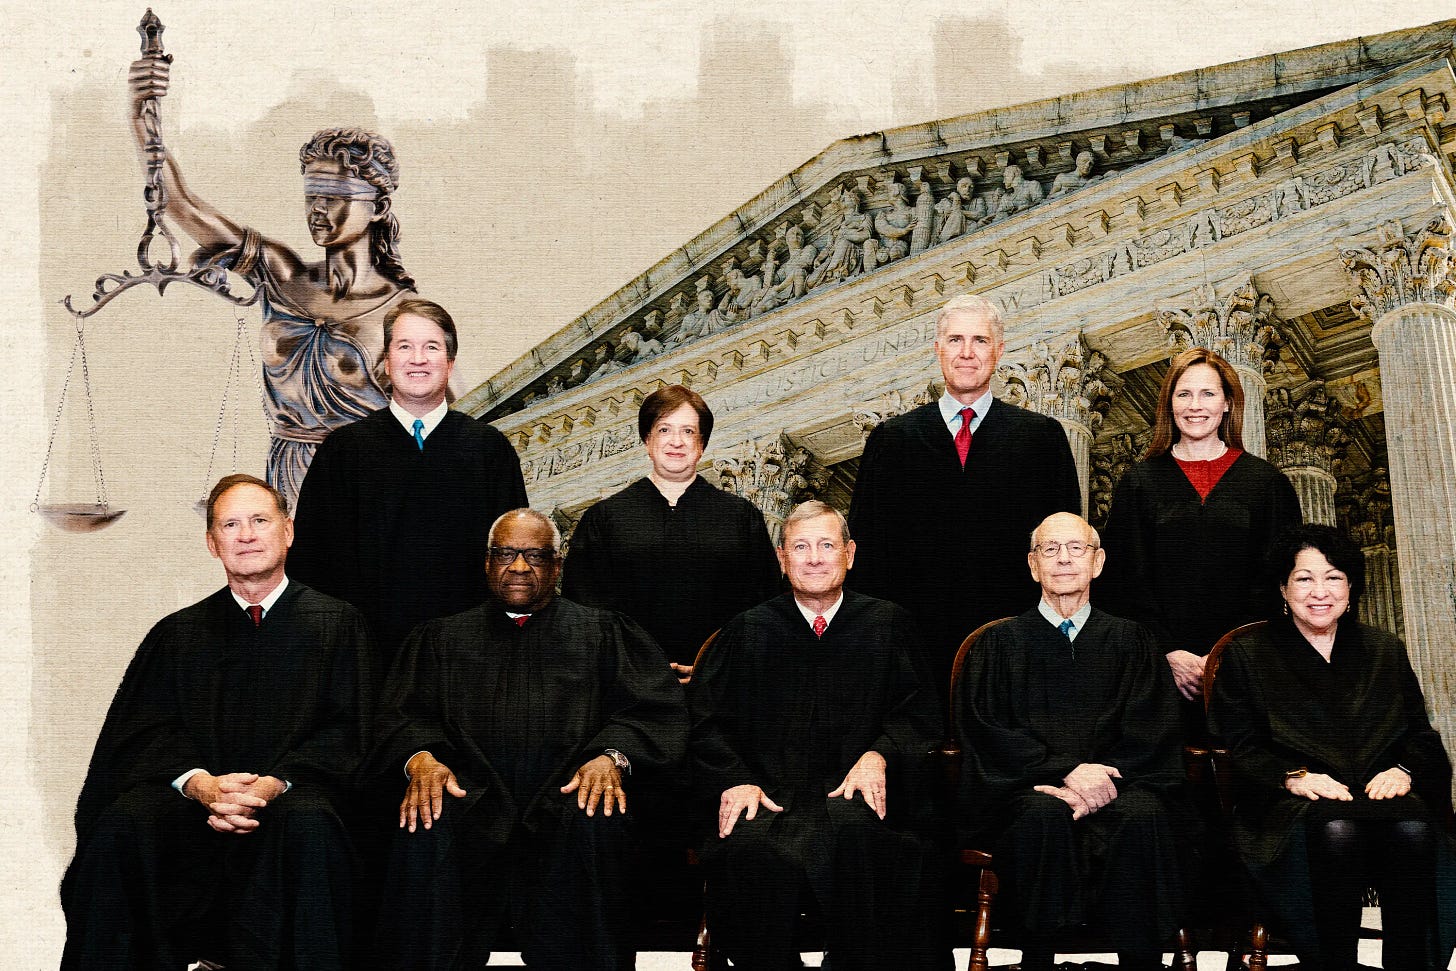 4 Supreme Court Cases That Could Curb the Administrative State